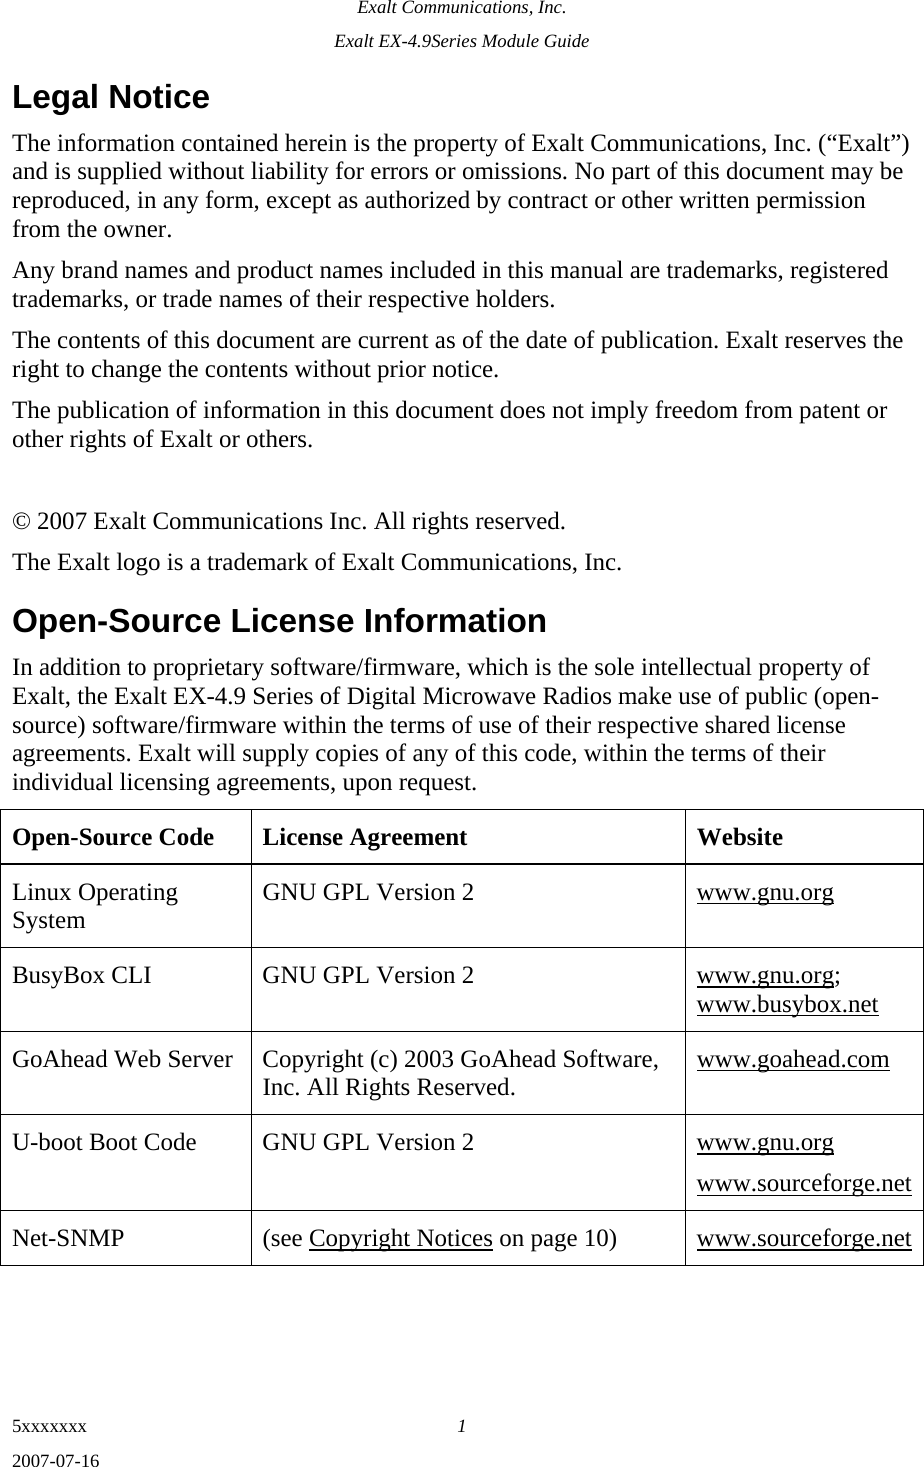 Exalt Communications, Inc. Exalt EX-4.9Series Module Guide 5xxxxxxx  1 2007-07-16 Legal Notice The information contained herein is the property of Exalt Communications, Inc. (“Exalt”) and is supplied without liability for errors or omissions. No part of this document may be reproduced, in any form, except as authorized by contract or other written permission from the owner. Any brand names and product names included in this manual are trademarks, registered trademarks, or trade names of their respective holders. The contents of this document are current as of the date of publication. Exalt reserves the right to change the contents without prior notice. The publication of information in this document does not imply freedom from patent or other rights of Exalt or others.  © 2007 Exalt Communications Inc. All rights reserved. The Exalt logo is a trademark of Exalt Communications, Inc. Open-Source License Information In addition to proprietary software/firmware, which is the sole intellectual property of Exalt, the Exalt EX-4.9 Series of Digital Microwave Radios make use of public (open-source) software/firmware within the terms of use of their respective shared license agreements. Exalt will supply copies of any of this code, within the terms of their individual licensing agreements, upon request. Open-Source Code  License Agreement  Website Linux Operating System  GNU GPL Version 2  www.gnu.org BusyBox CLI  GNU GPL Version 2  www.gnu.org; www.busybox.net GoAhead Web Server  Copyright (c) 2003 GoAhead Software, Inc. All Rights Reserved.  www.goahead.com  U-boot Boot Code  GNU GPL Version 2  www.gnu.org www.sourceforge.net Net-SNMP  (see Copyright Notices on page 10)  www.sourceforge.net 